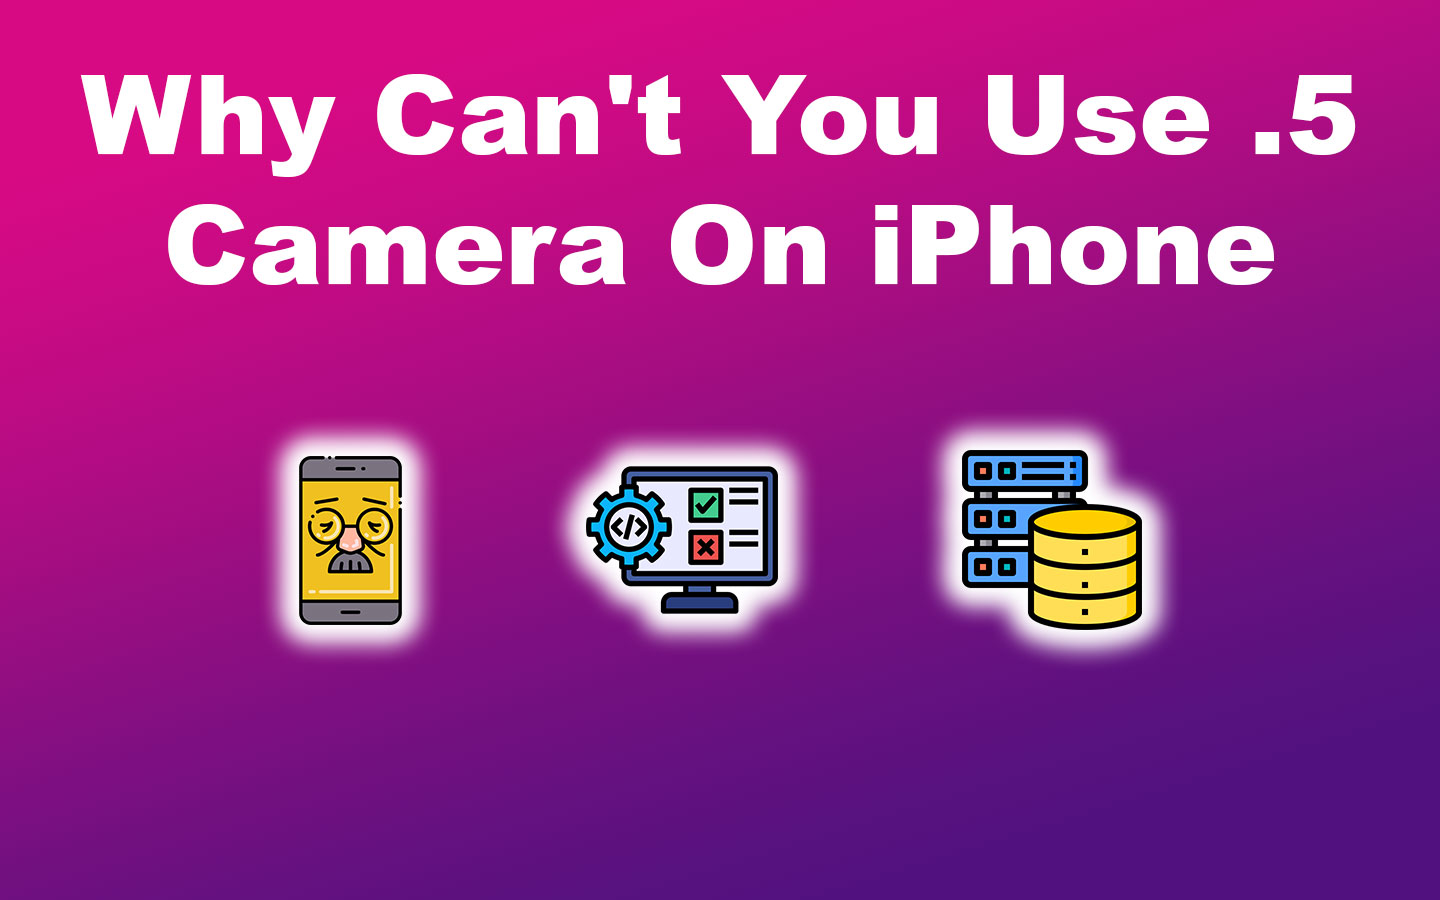 Why Can't You Use .5 Camera On iPhone